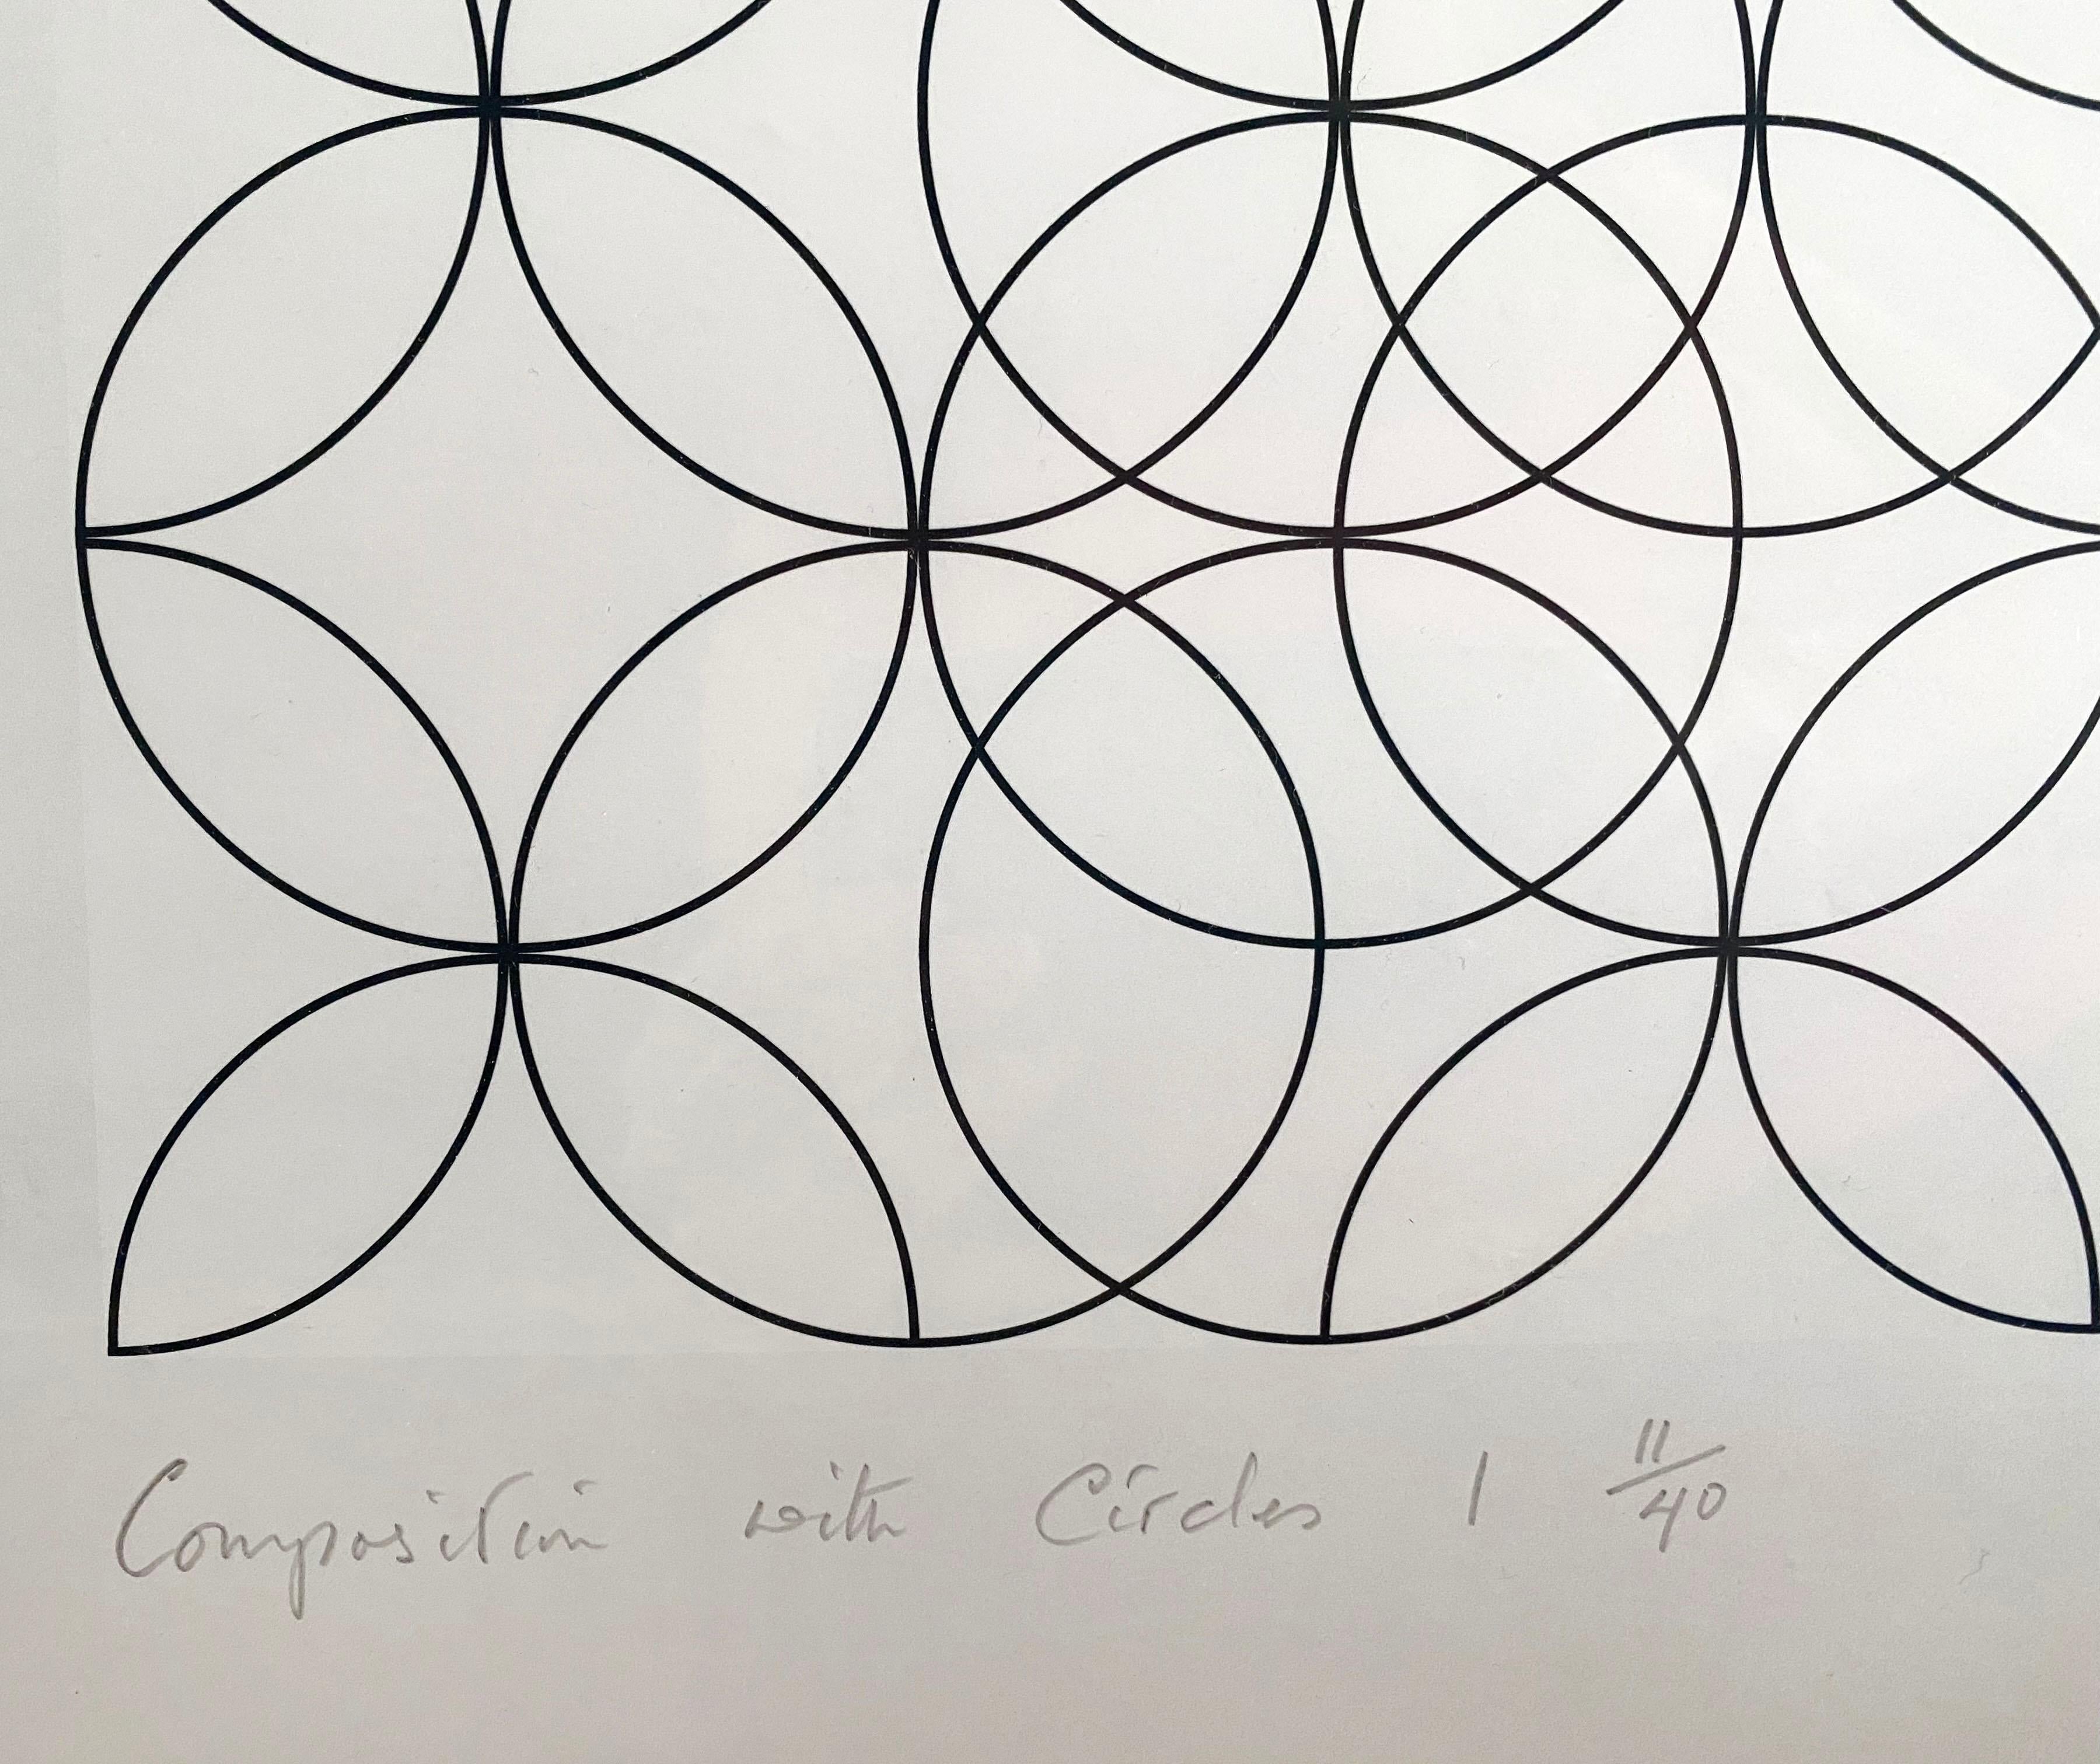 Composition with Circles I (1998) marks the first highly coveted iteration of Riley’s limited edition series, Composition with Circles. Rhythmic, lyrical and optical, Riley intuitively formulates an abstract field of repeating and overlapping